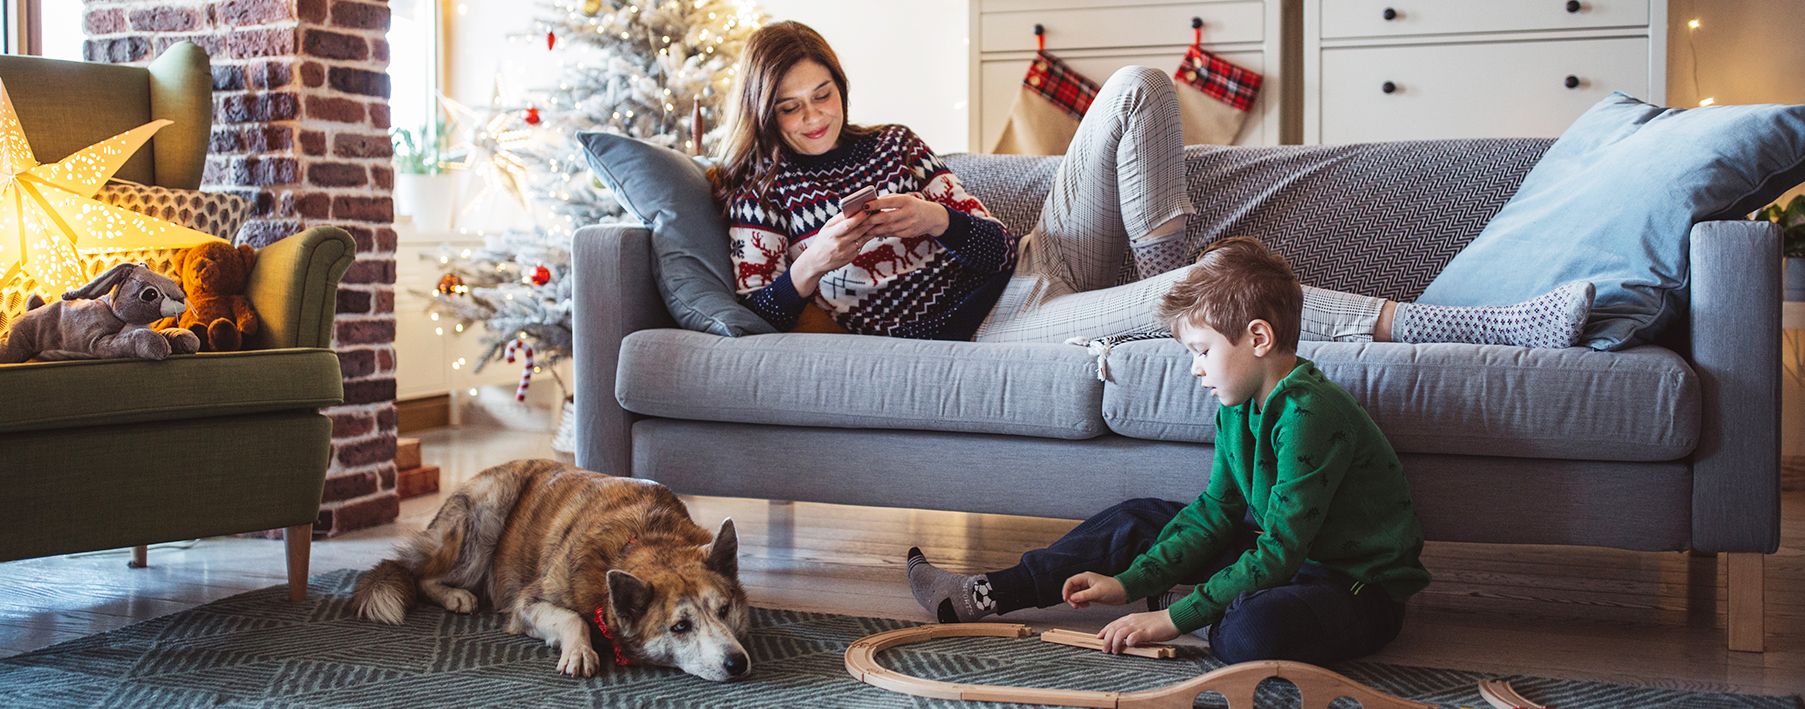 A boy playing with train tracks on a rug next to a dog, with a woman looking on her phone on a couch behind him